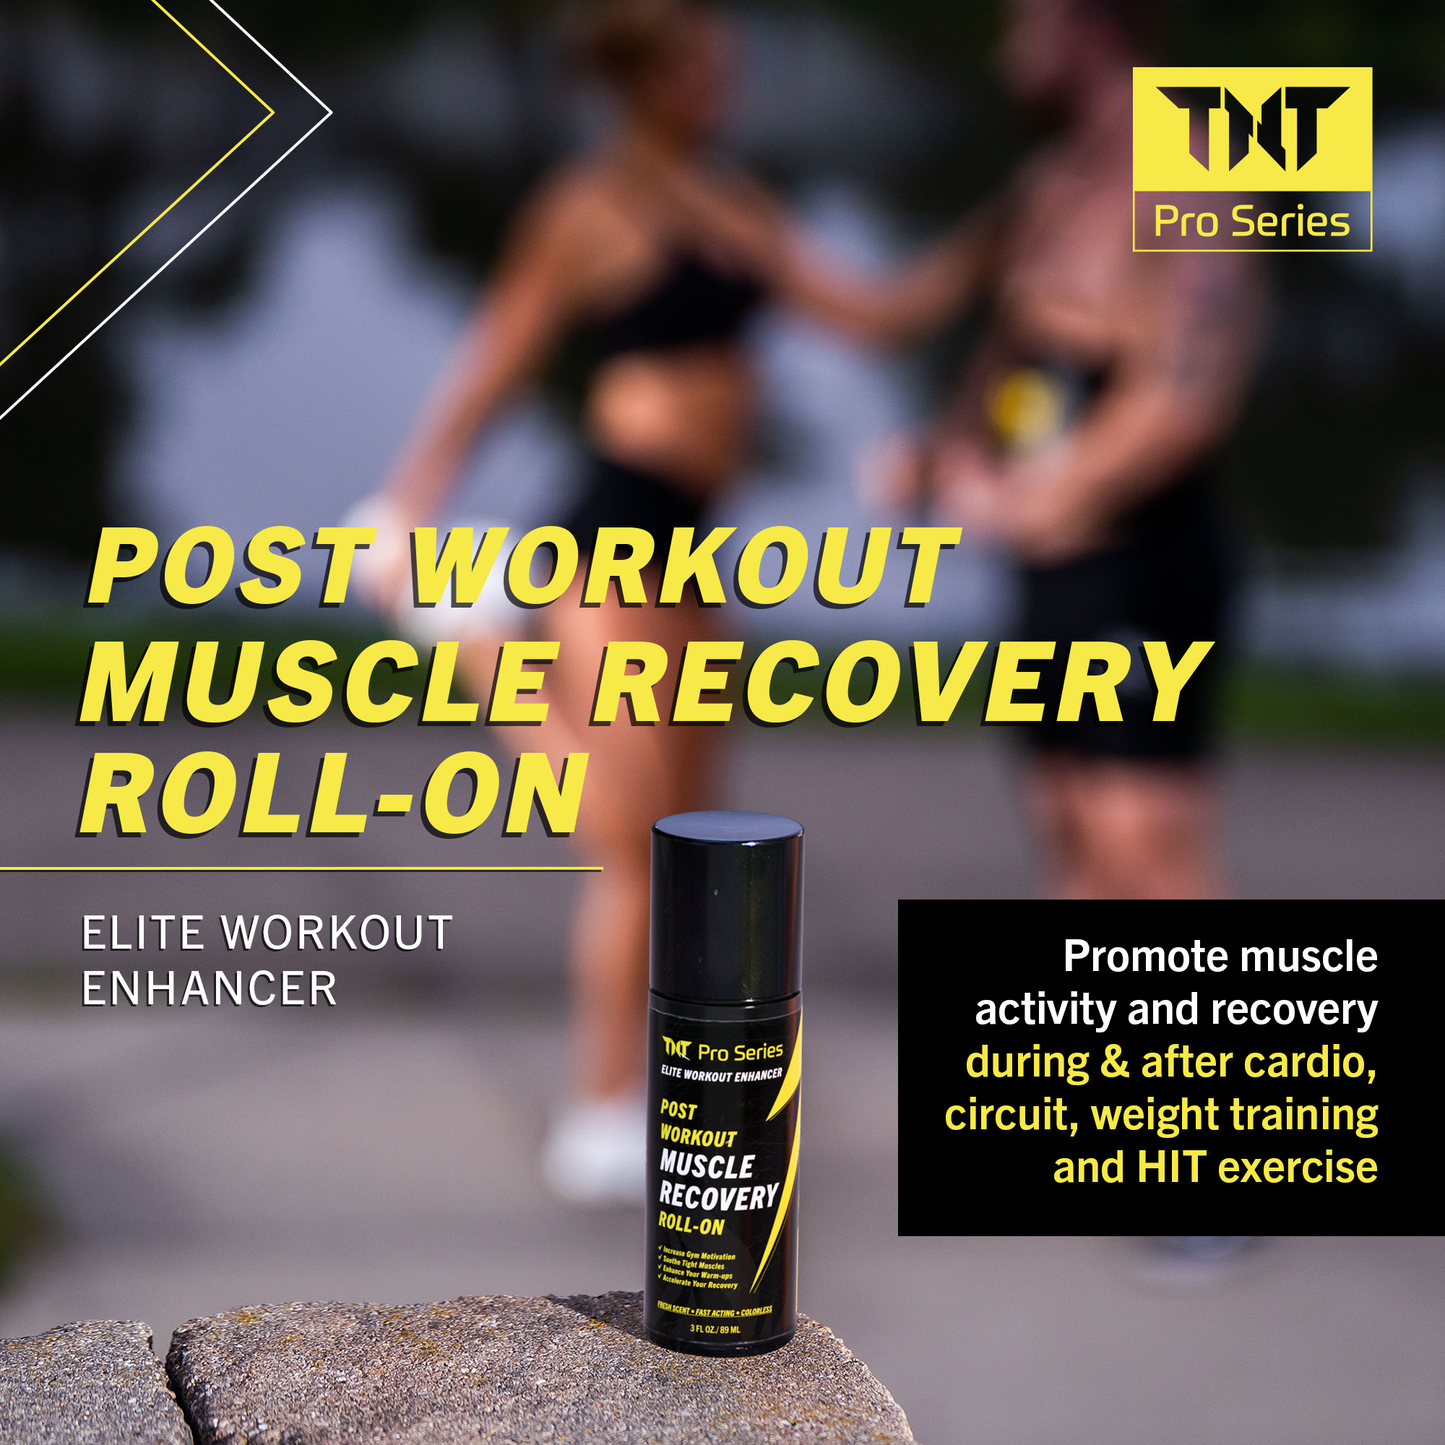 Post Workout Muscle Recovery Roll-On – TNT Pro Series